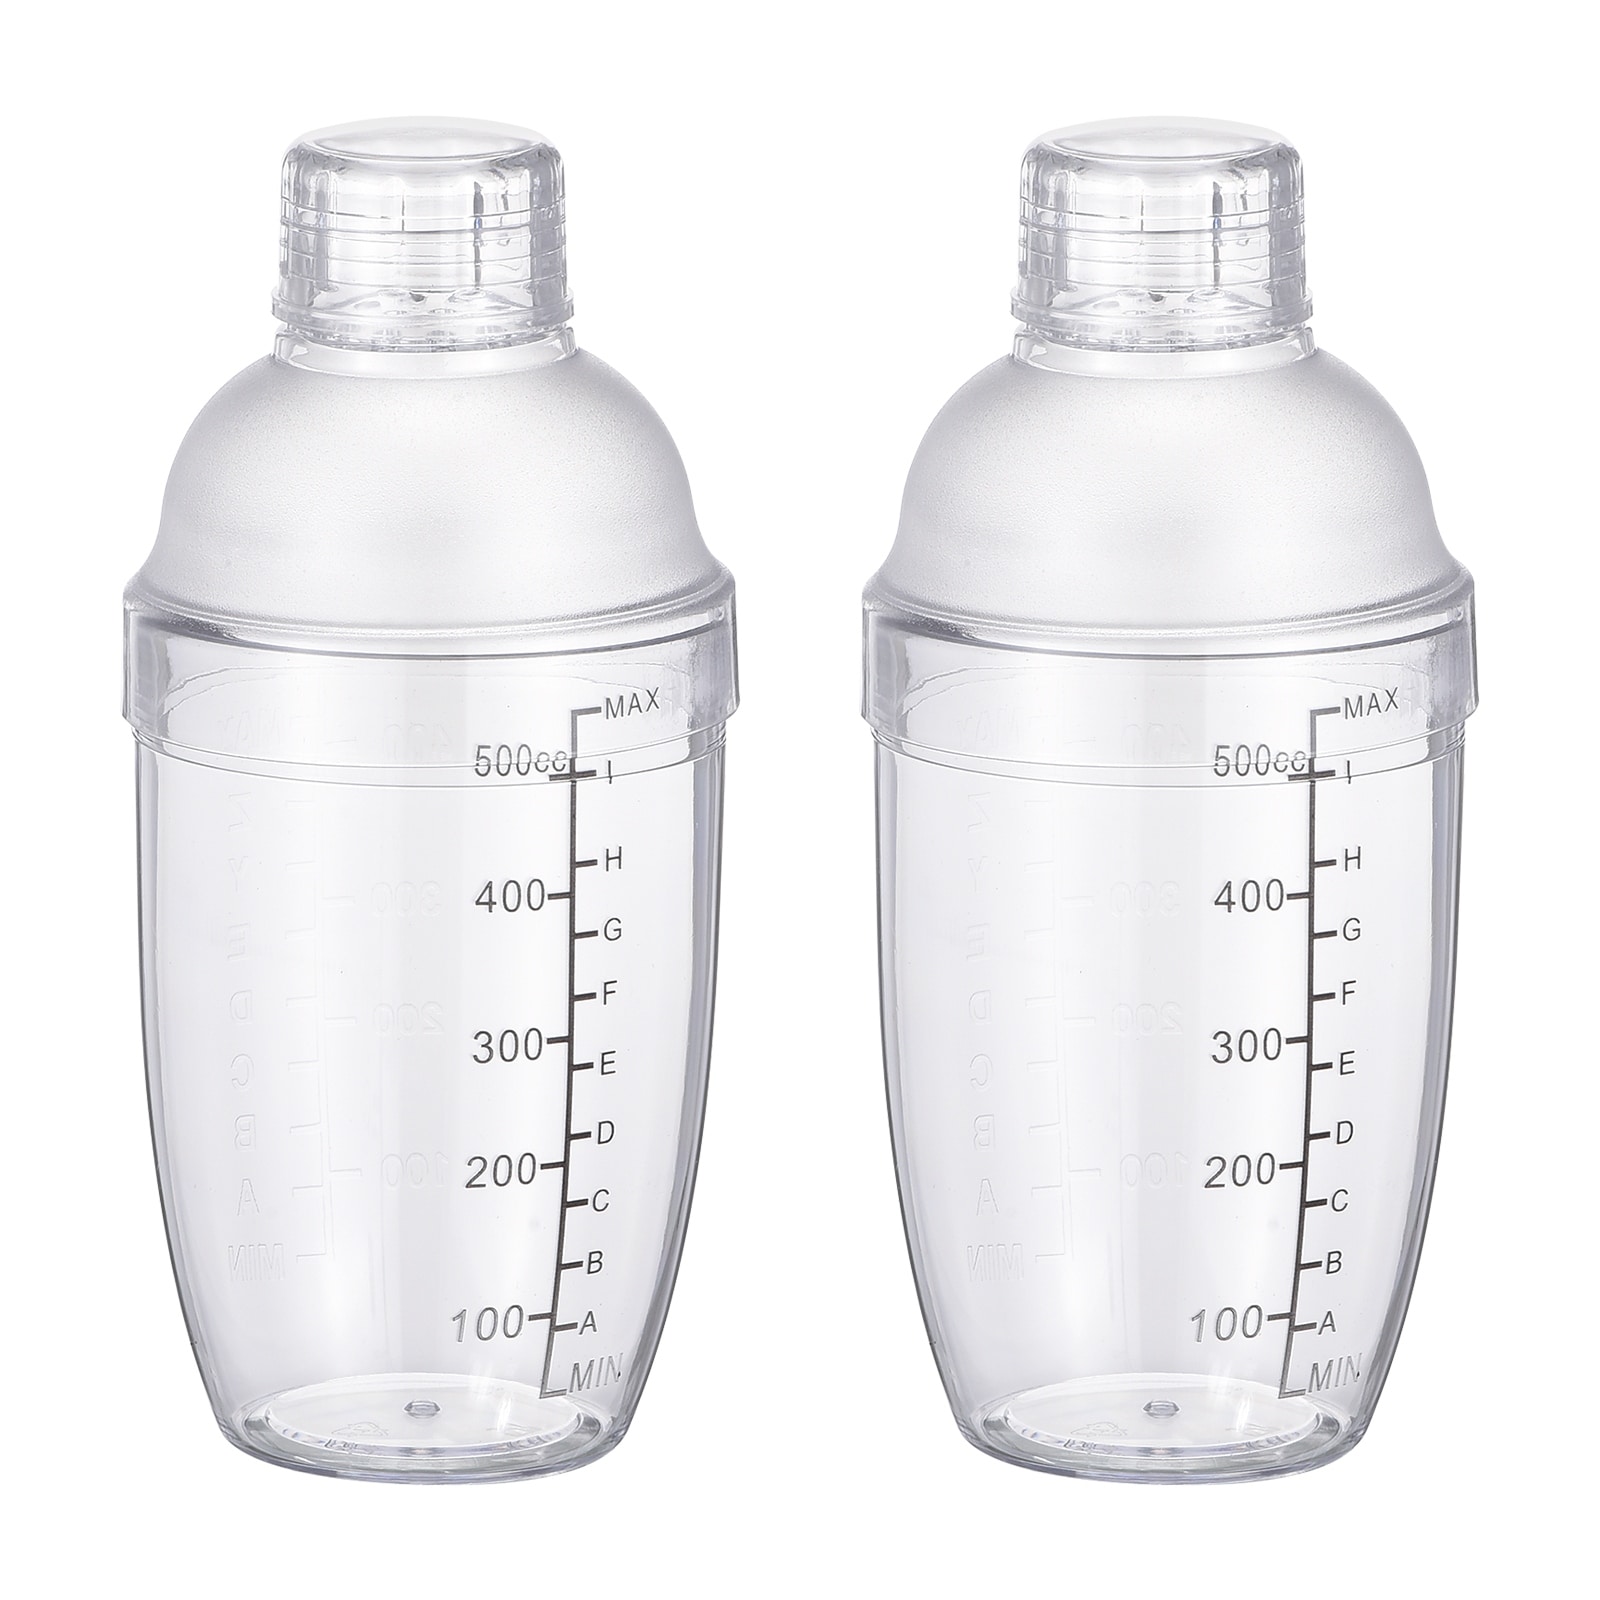 https://ak1.ostkcdn.com/images/products/is/images/direct/96cf7836710b79ddb05fe6a7a1f4cb406537c1fa/500ml-2pcs-Plastic-Cocktail-Shaker-Cup-Scale-Wine-Beverage-Mixer-Drink-Tools.jpg